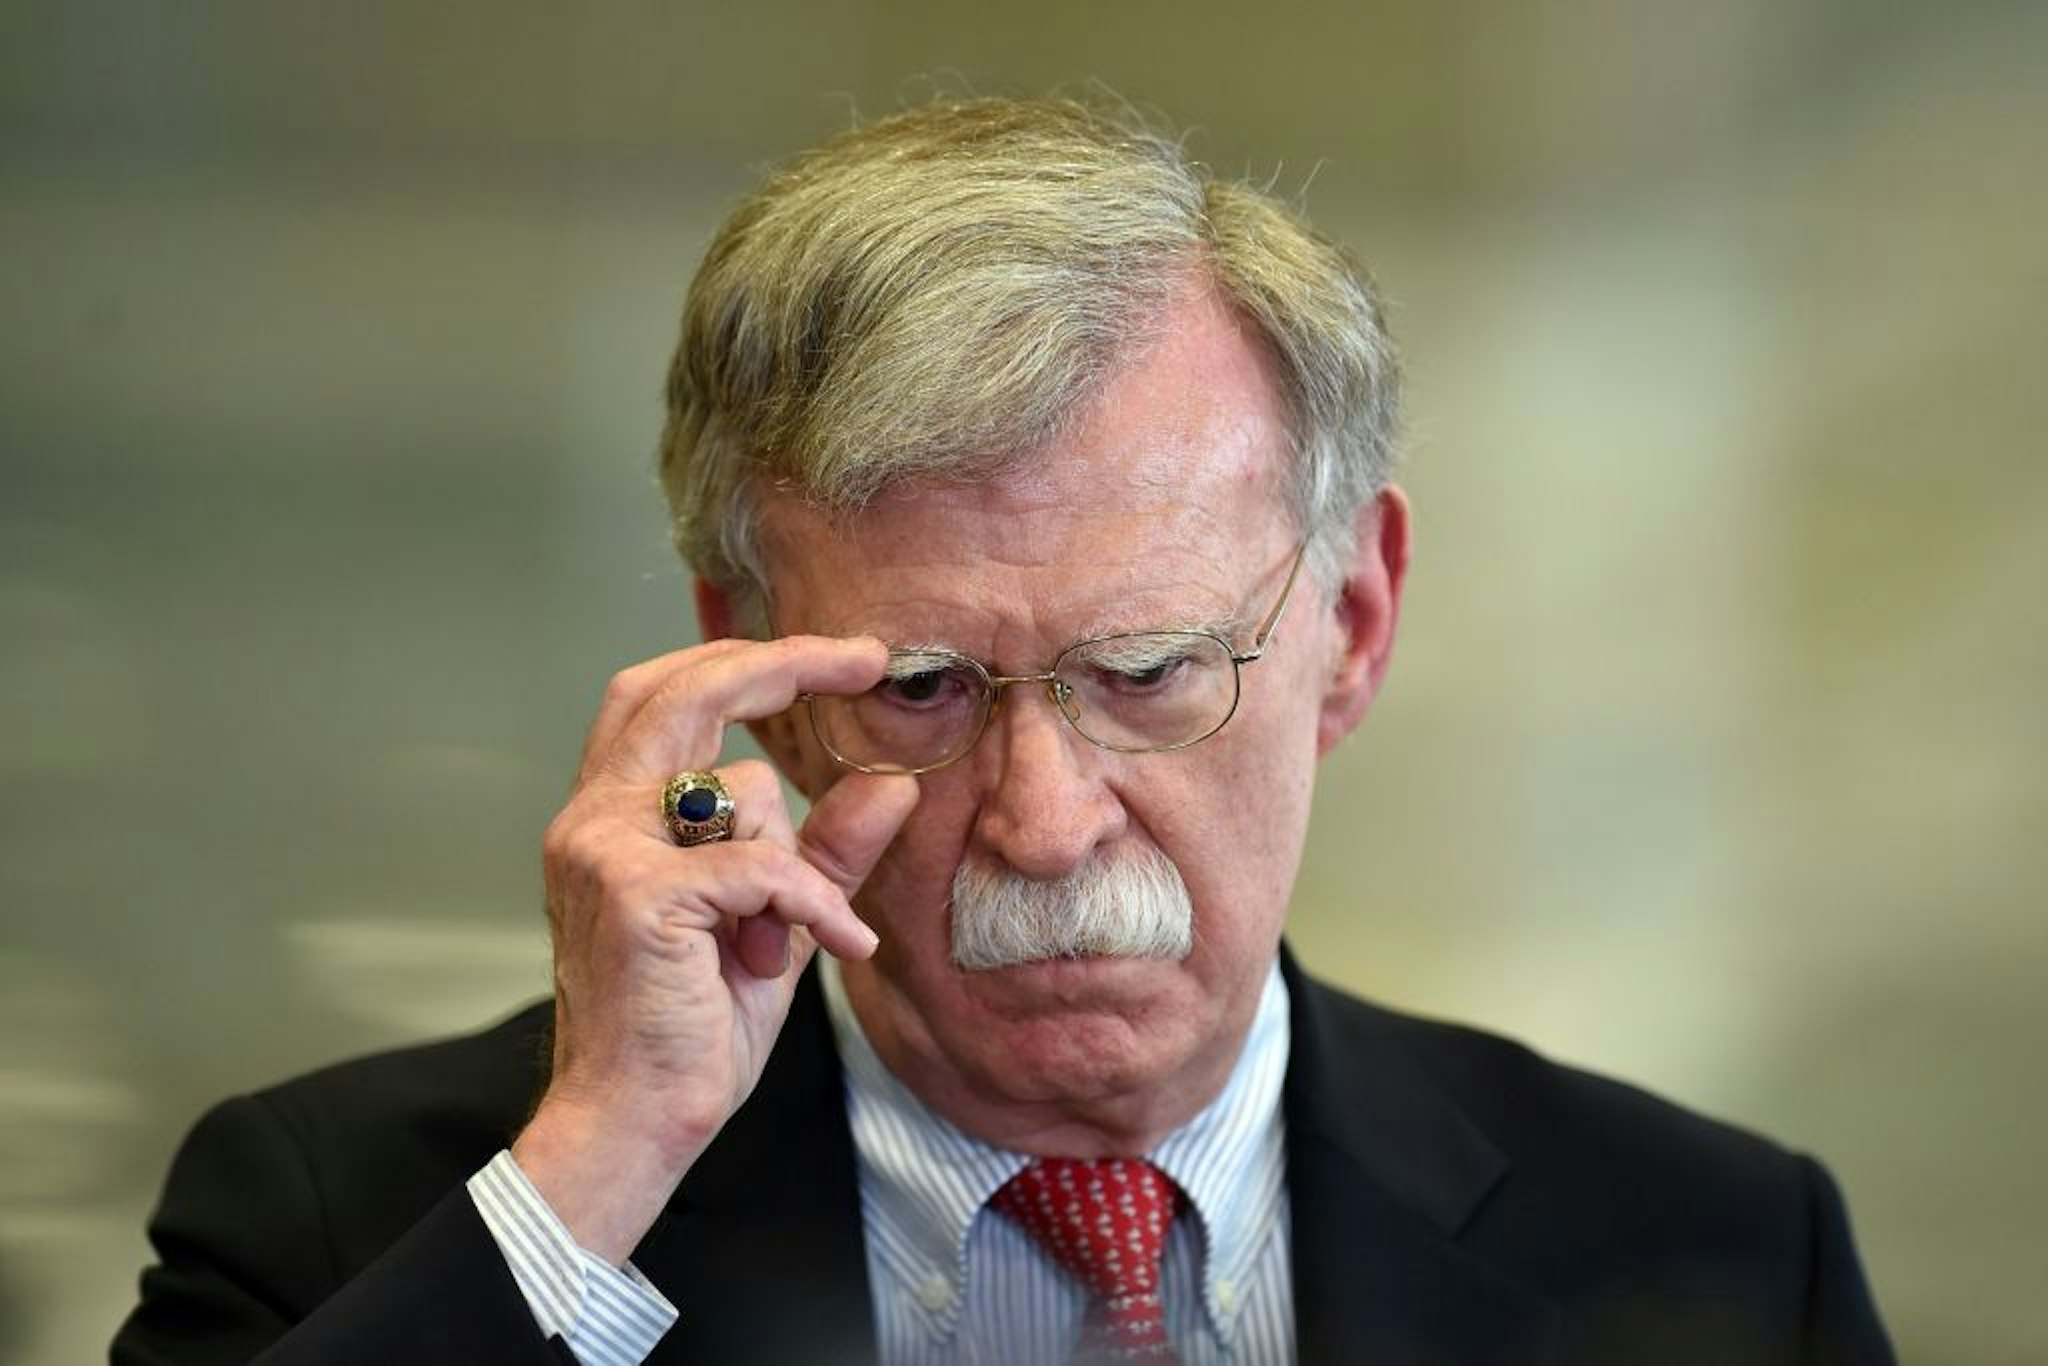 US National Security Advisor John Bolton answers journalists questions after his meeting with Belarus President in Minsk on August 29, 2019